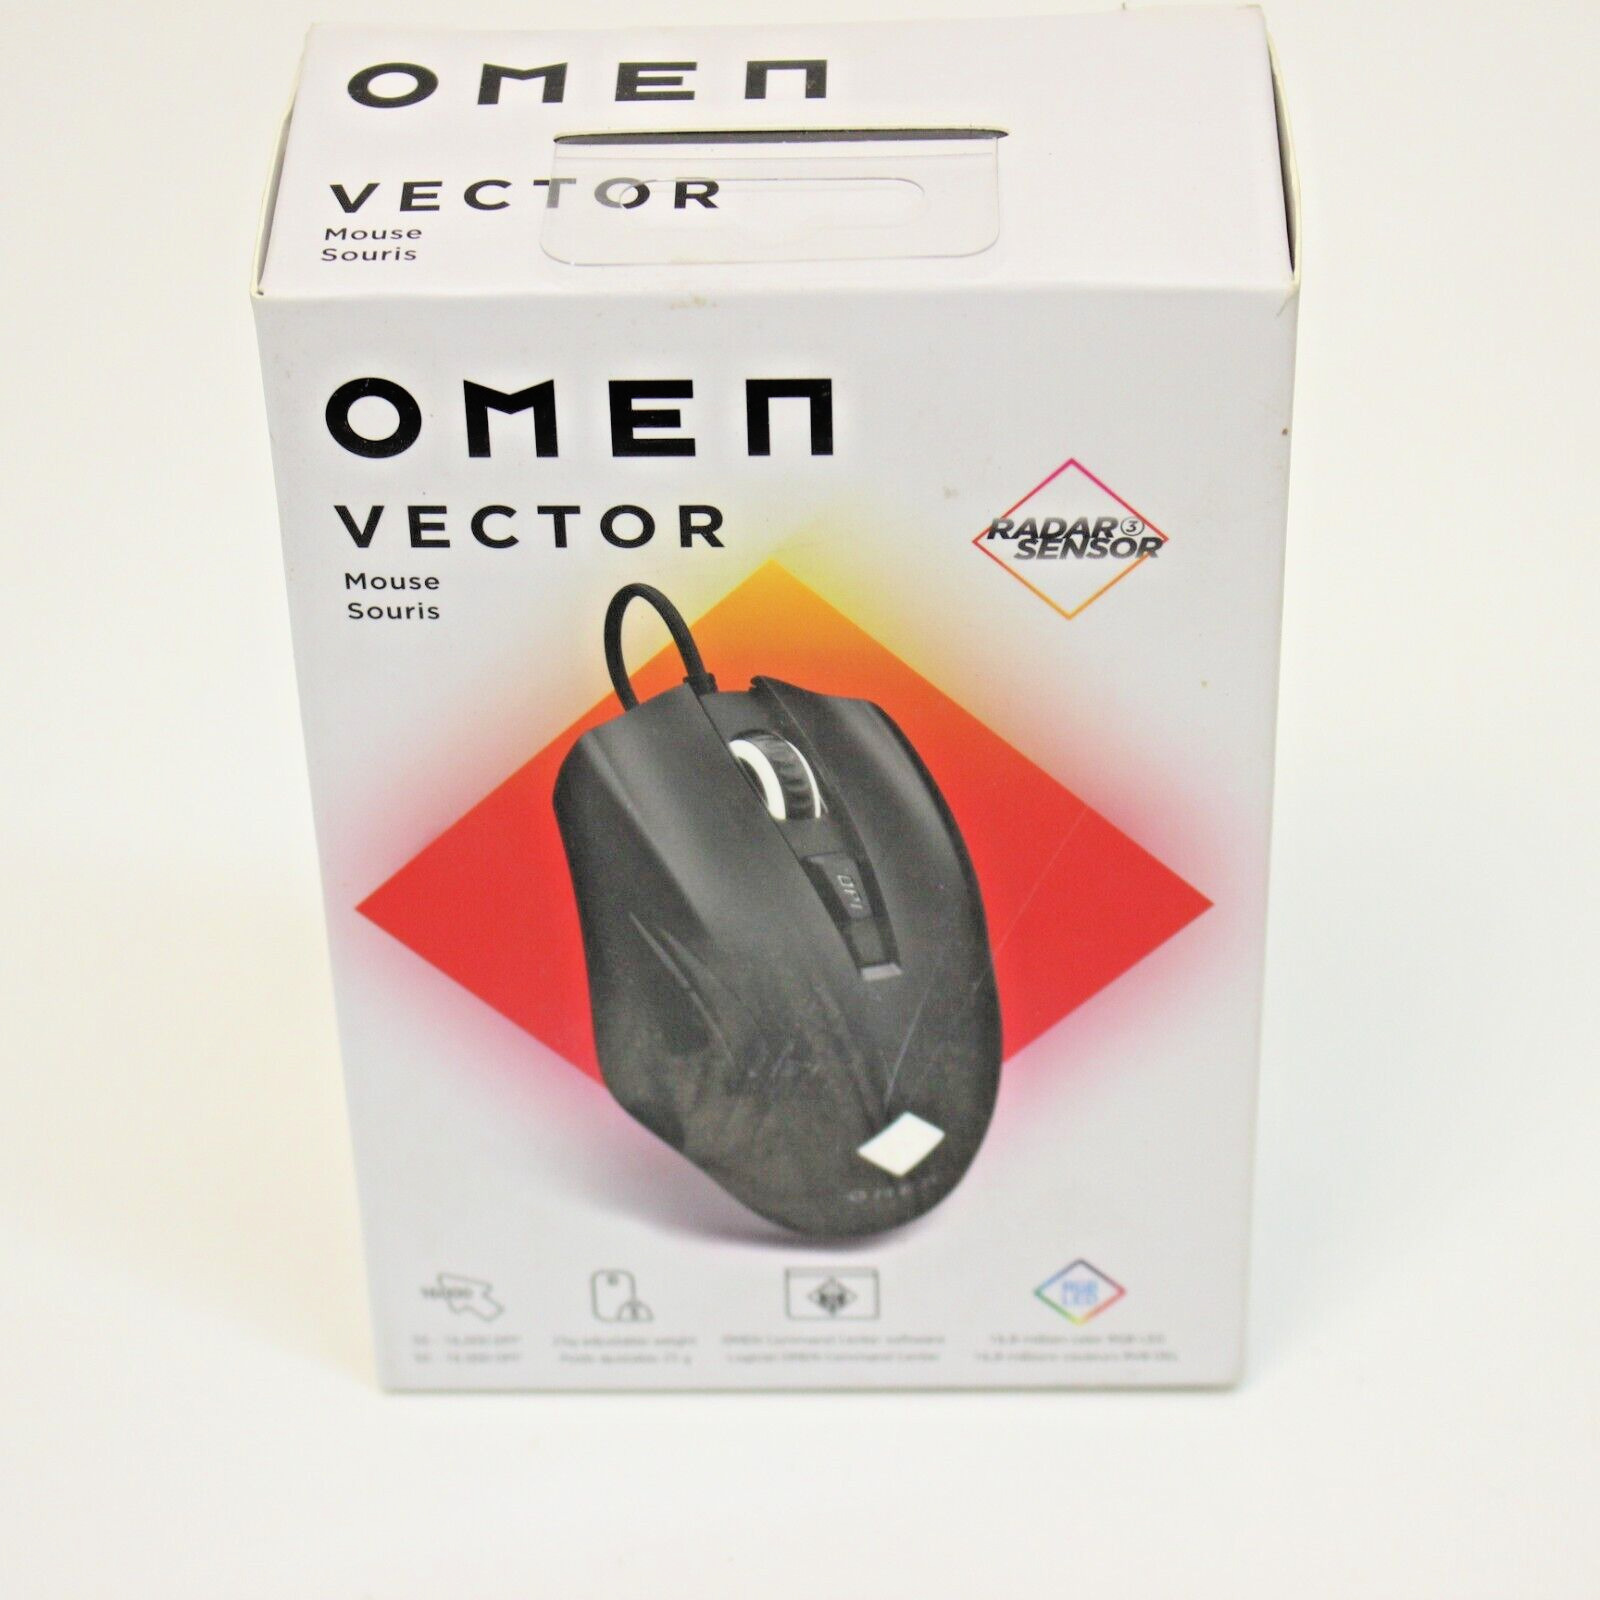 Factory Sealed HP OMEN - Vector Wired Gaming Mouse - Black